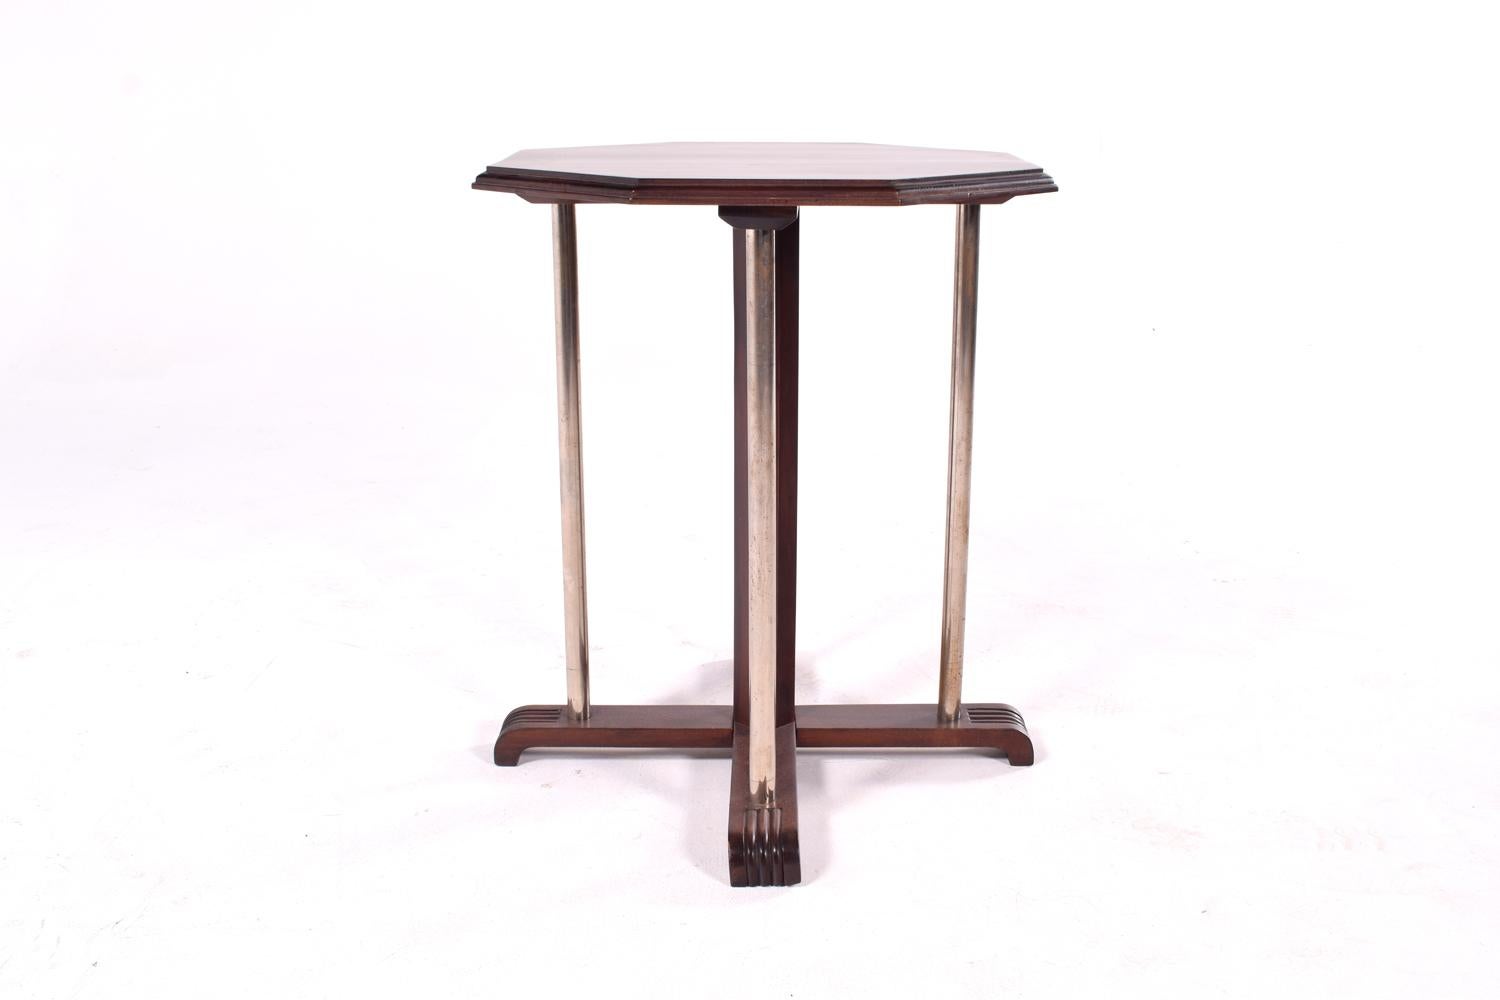 Art Deco French octagonal side table, with an unique combination of aluminum tubing and wood this side table exhibits the Art Deco styling. Mahogany octagonal tabletop.